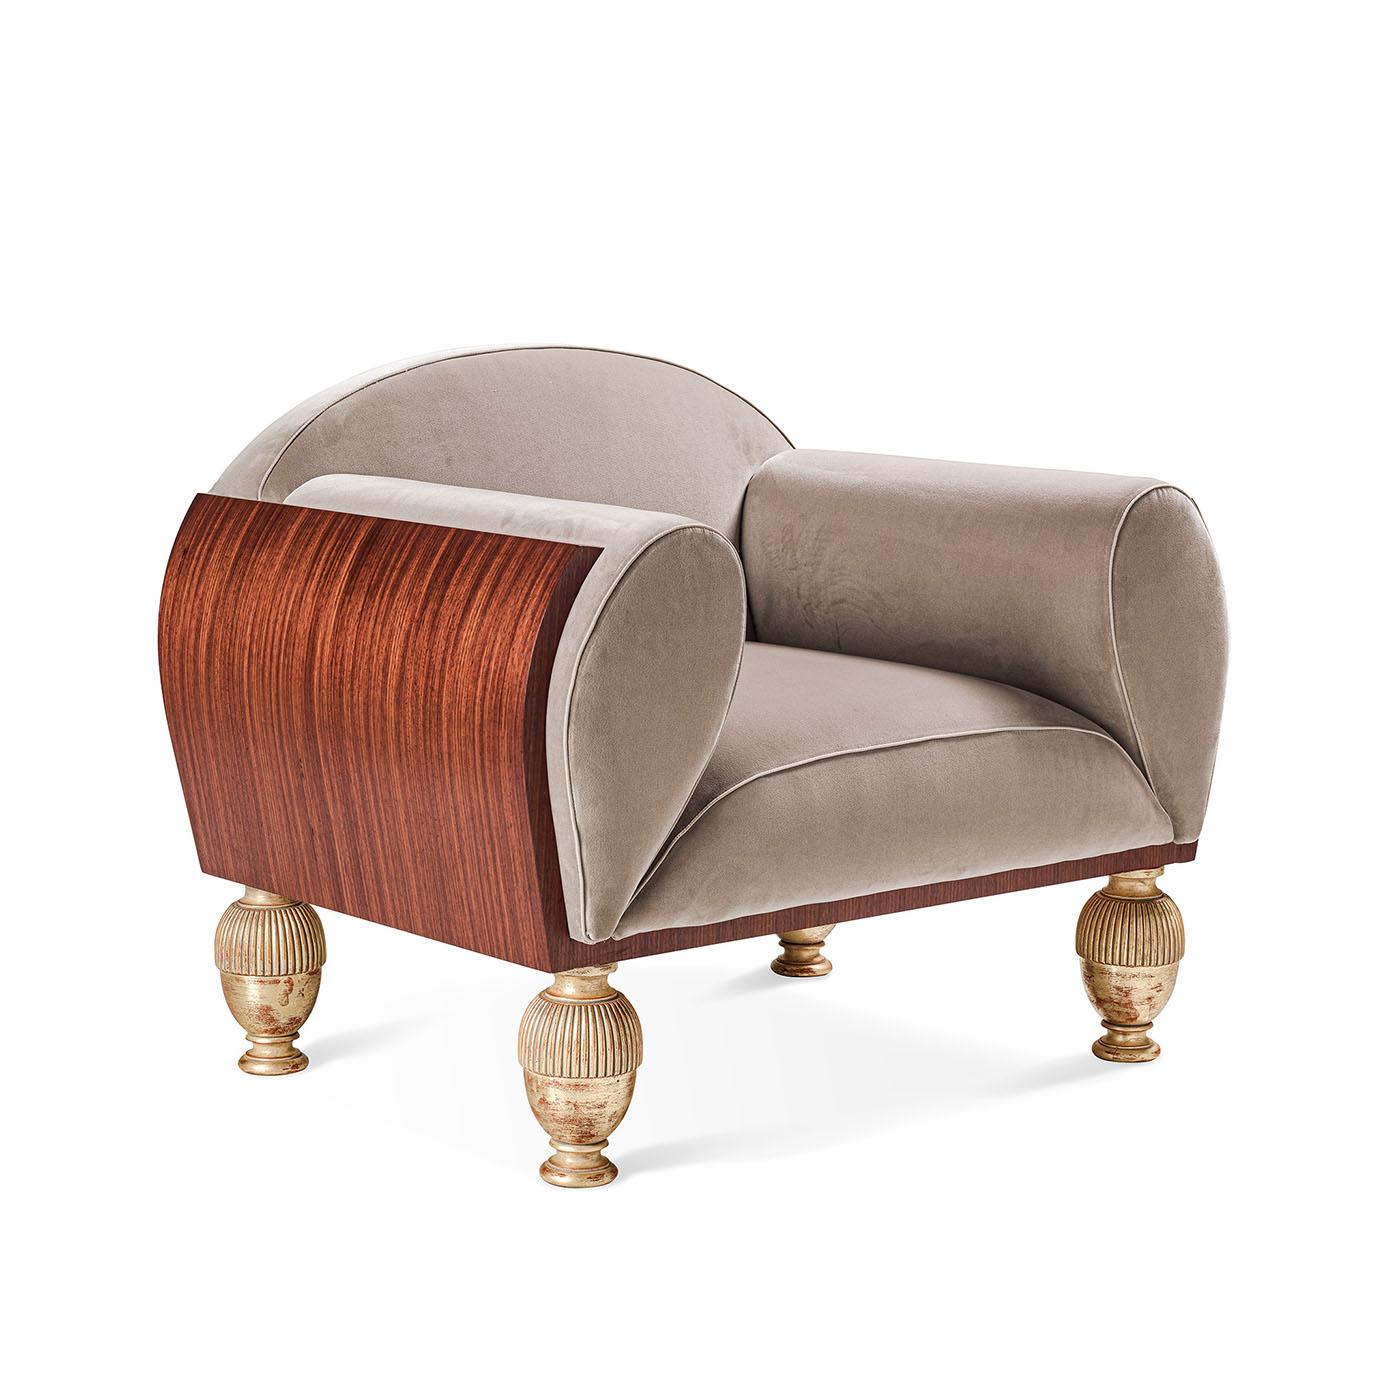 Elegant velvet upholstered armchair, its shape is enclosed in a curved structure plated with Paduk wood. Handcrafted and enriched with the detail of gold leaf finish feet.